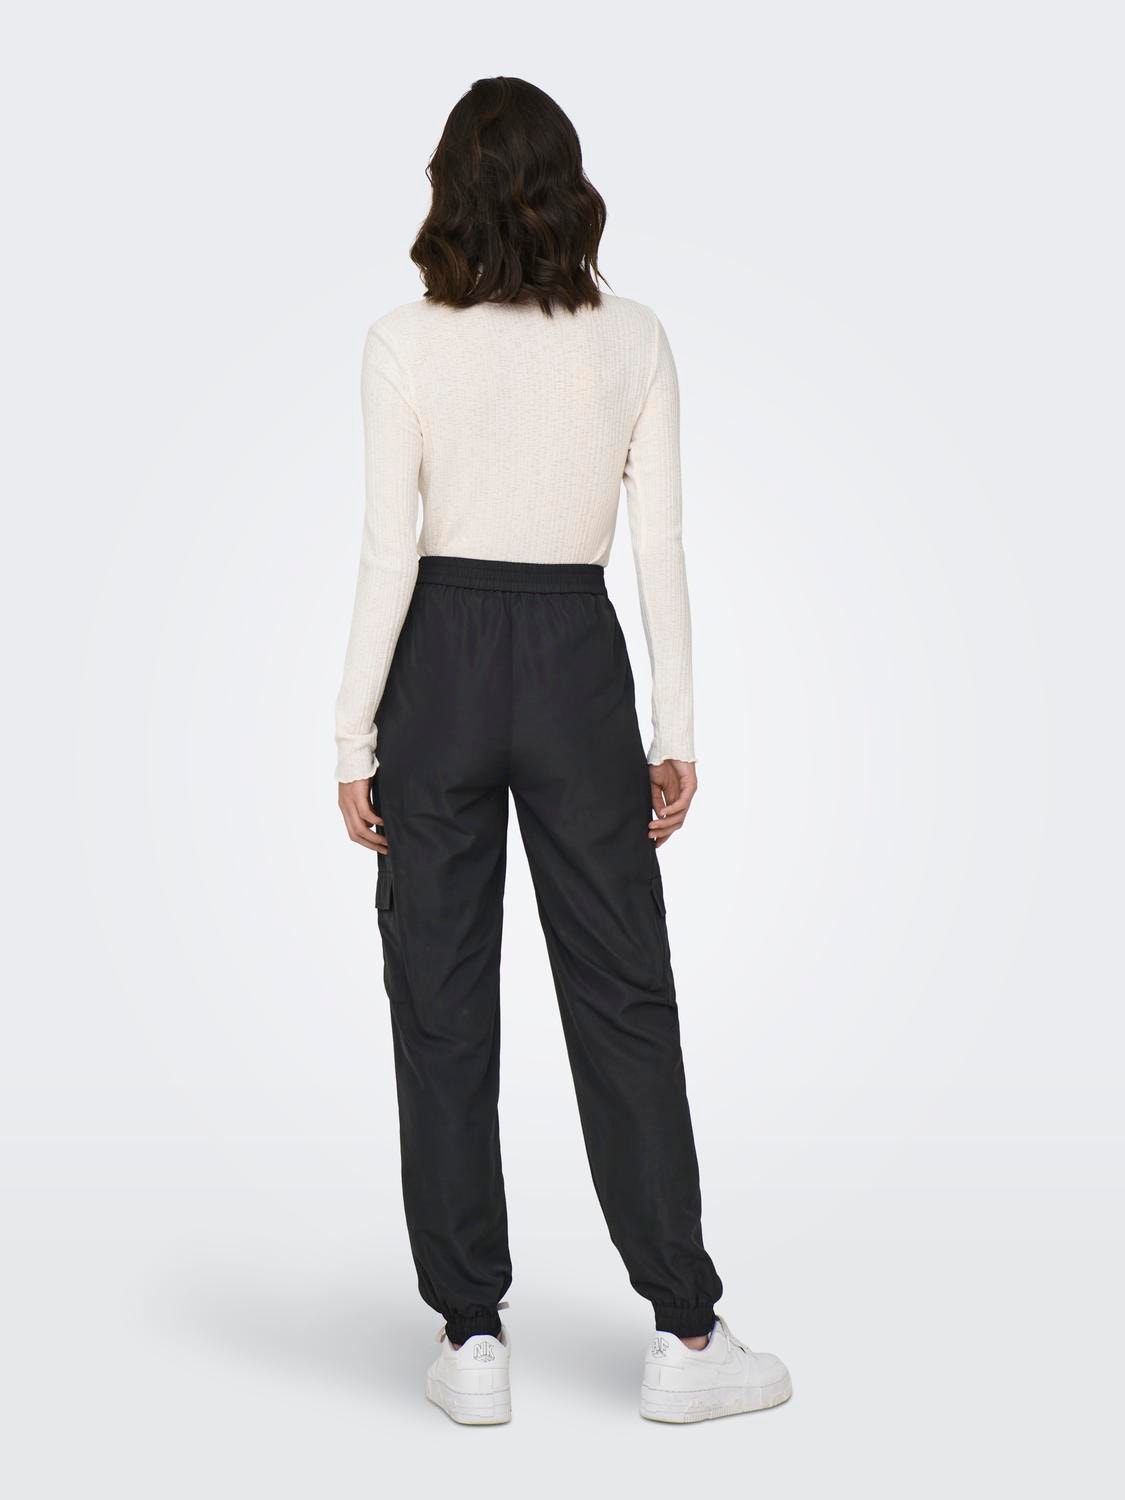 ONLY Cargo trousers with mid waist -Black - 15301582